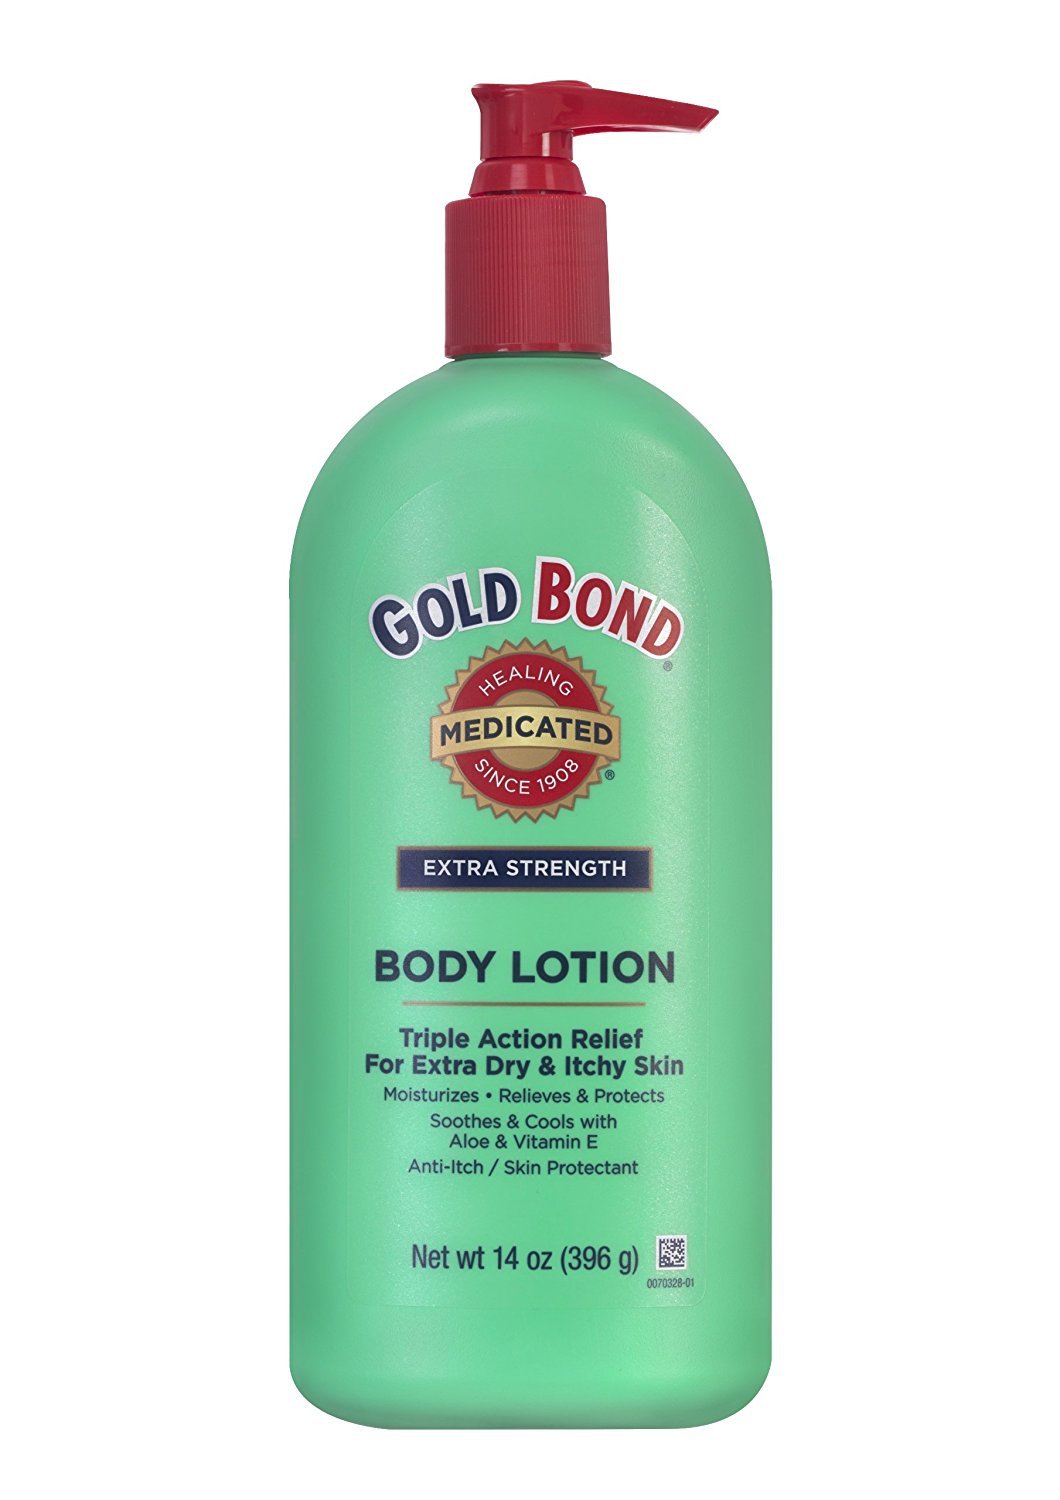 Gold Bond Medicated Extra Strength Body Lotion, 14